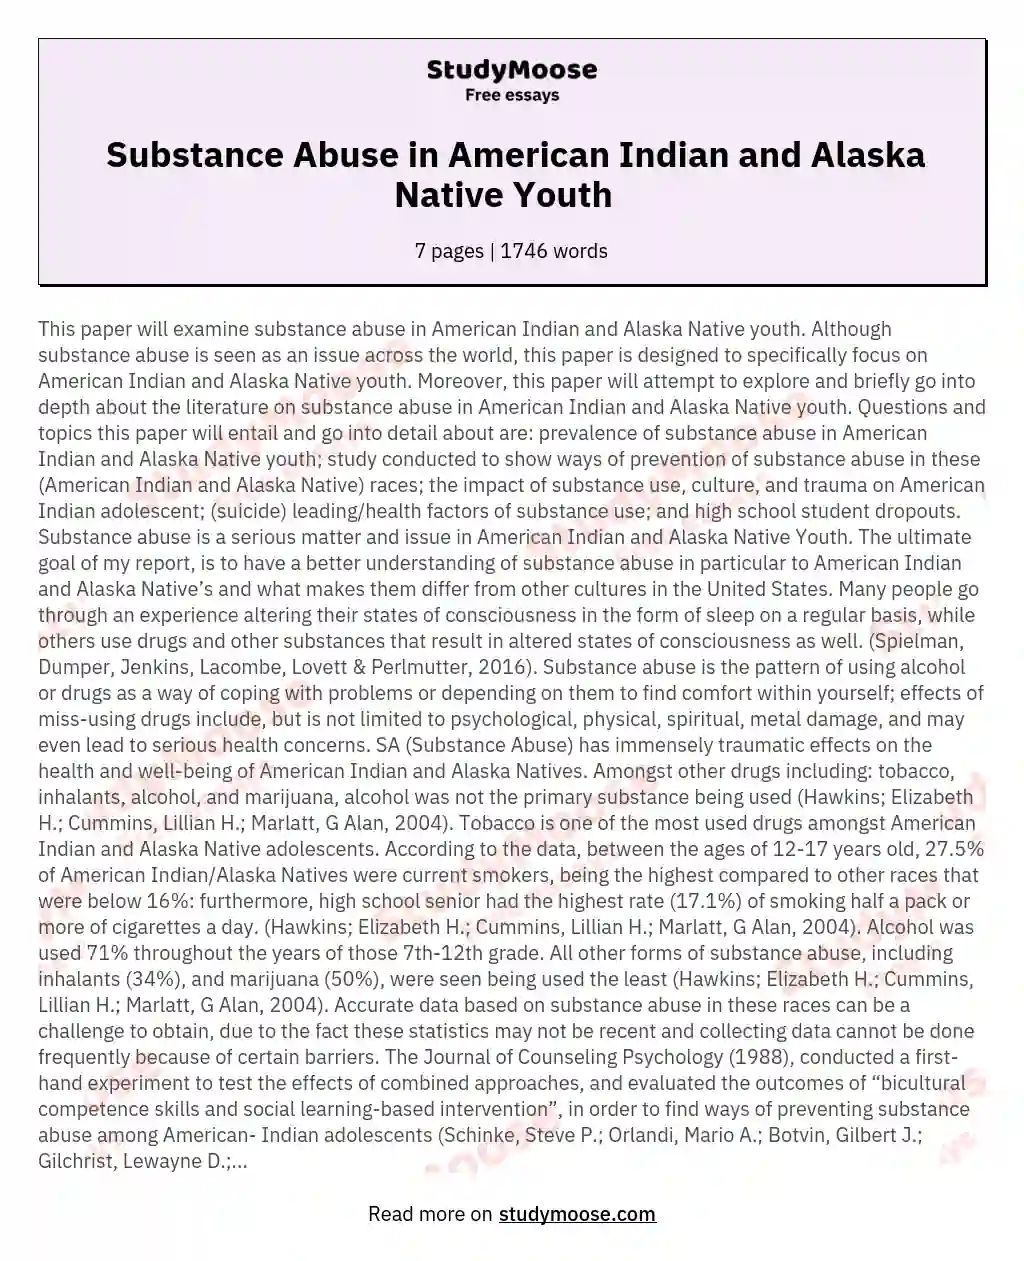  Substance Abuse in American Indian and Alaska Native Youth   essay